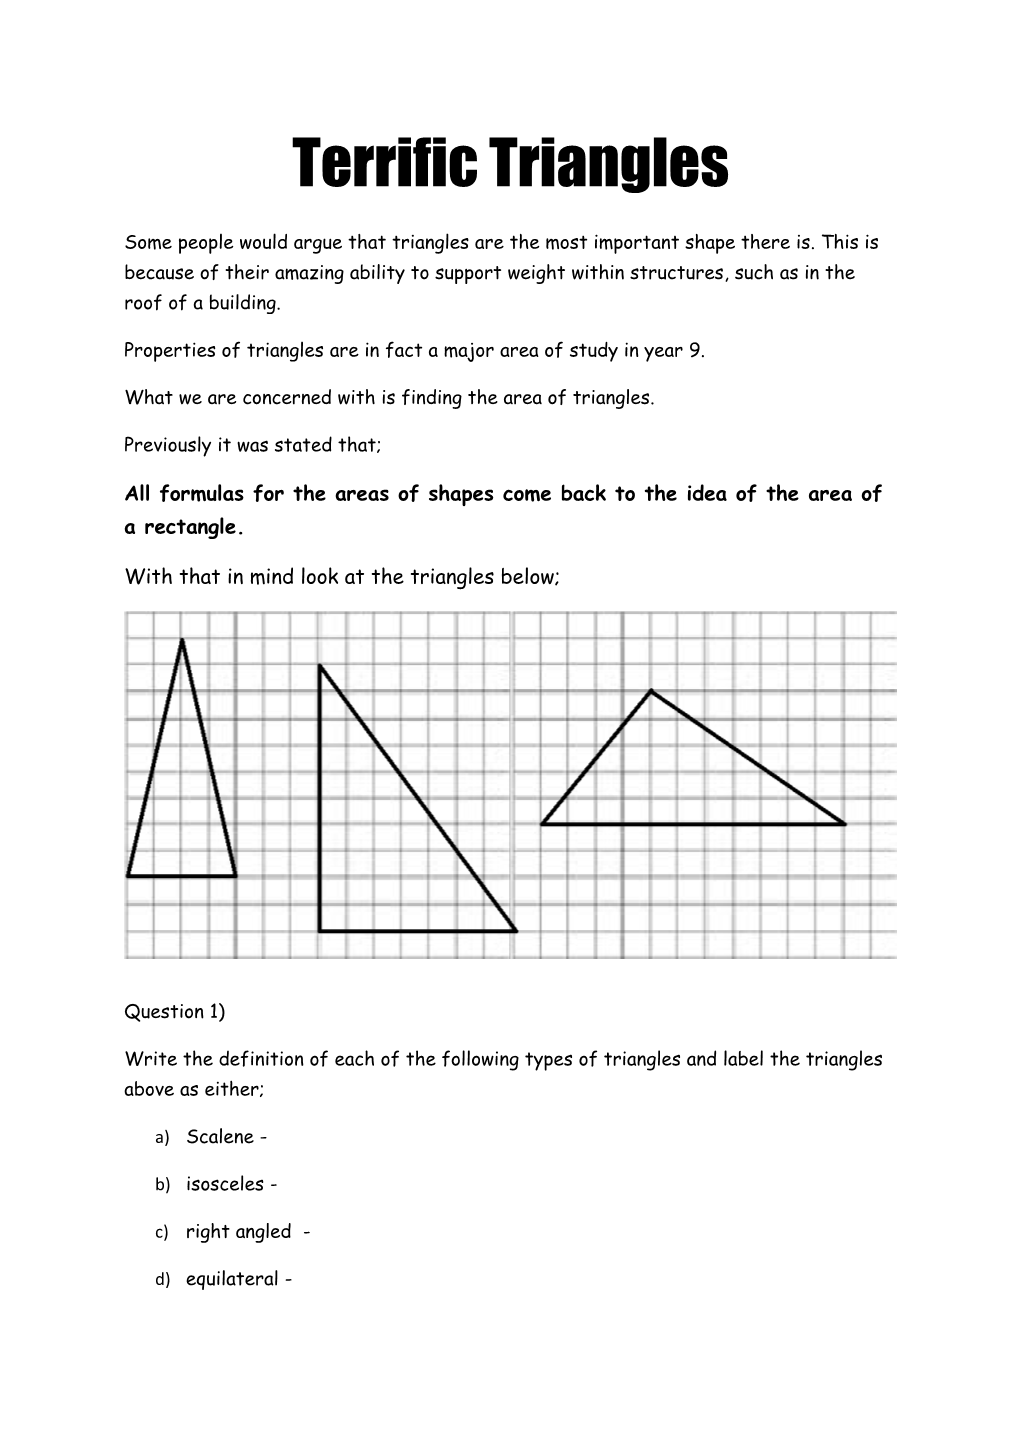 Properties of Triangles Are in Fact a Major Area of Study in Year 9